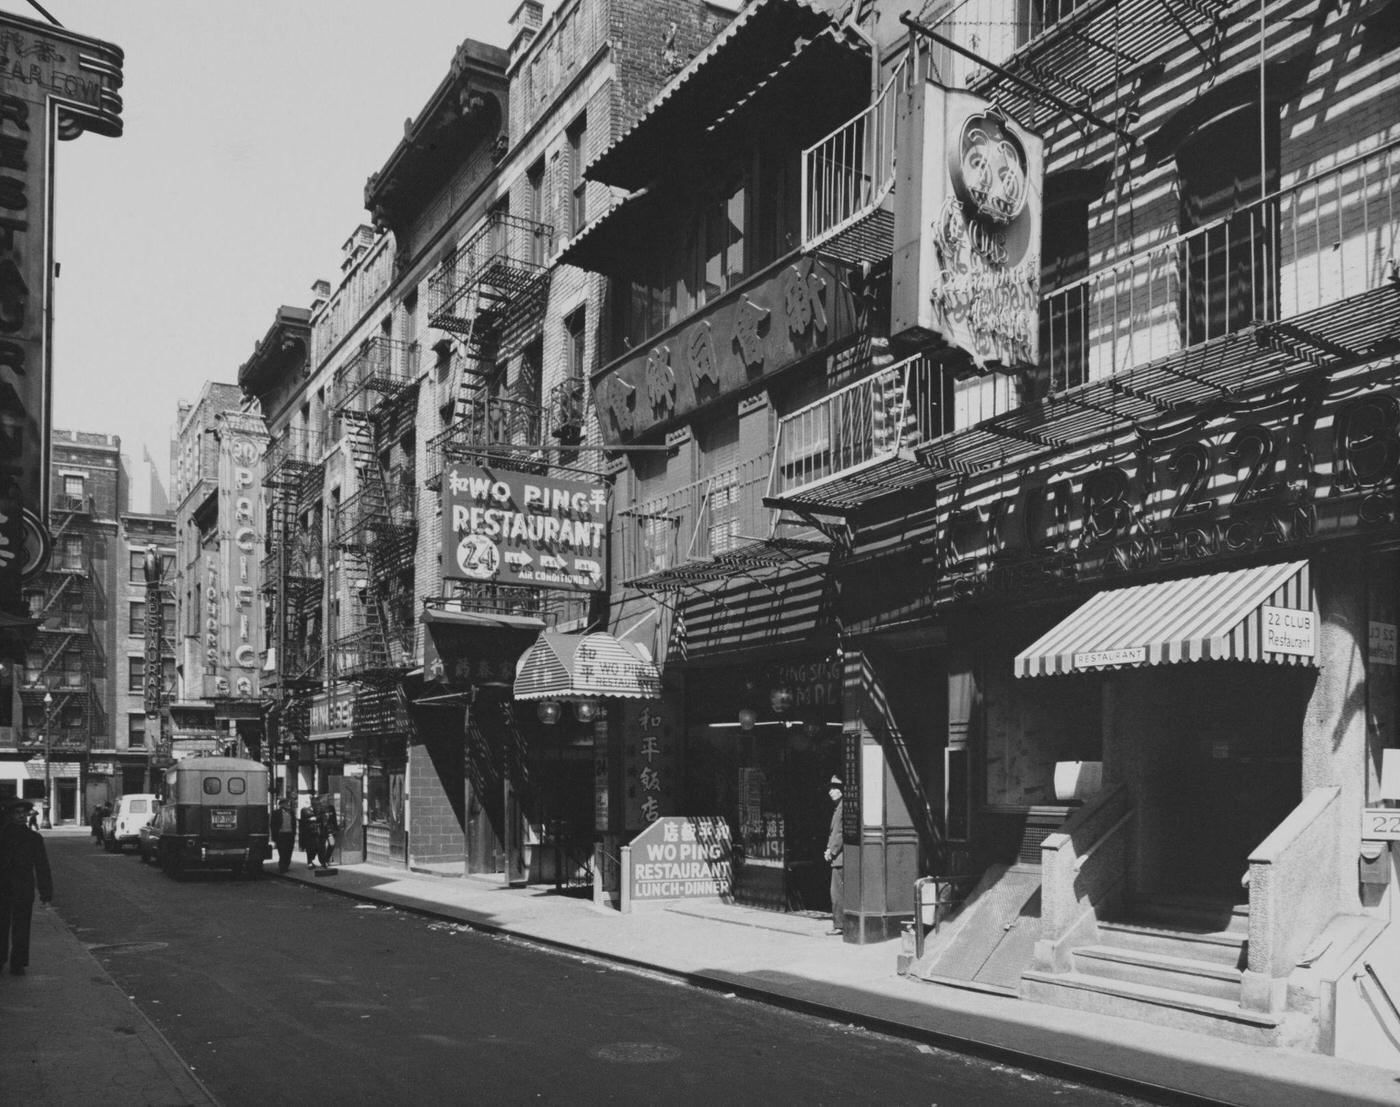 Pell Street: Wo Ping Restaurant And Others In Chinatown, Manhattan, 1950